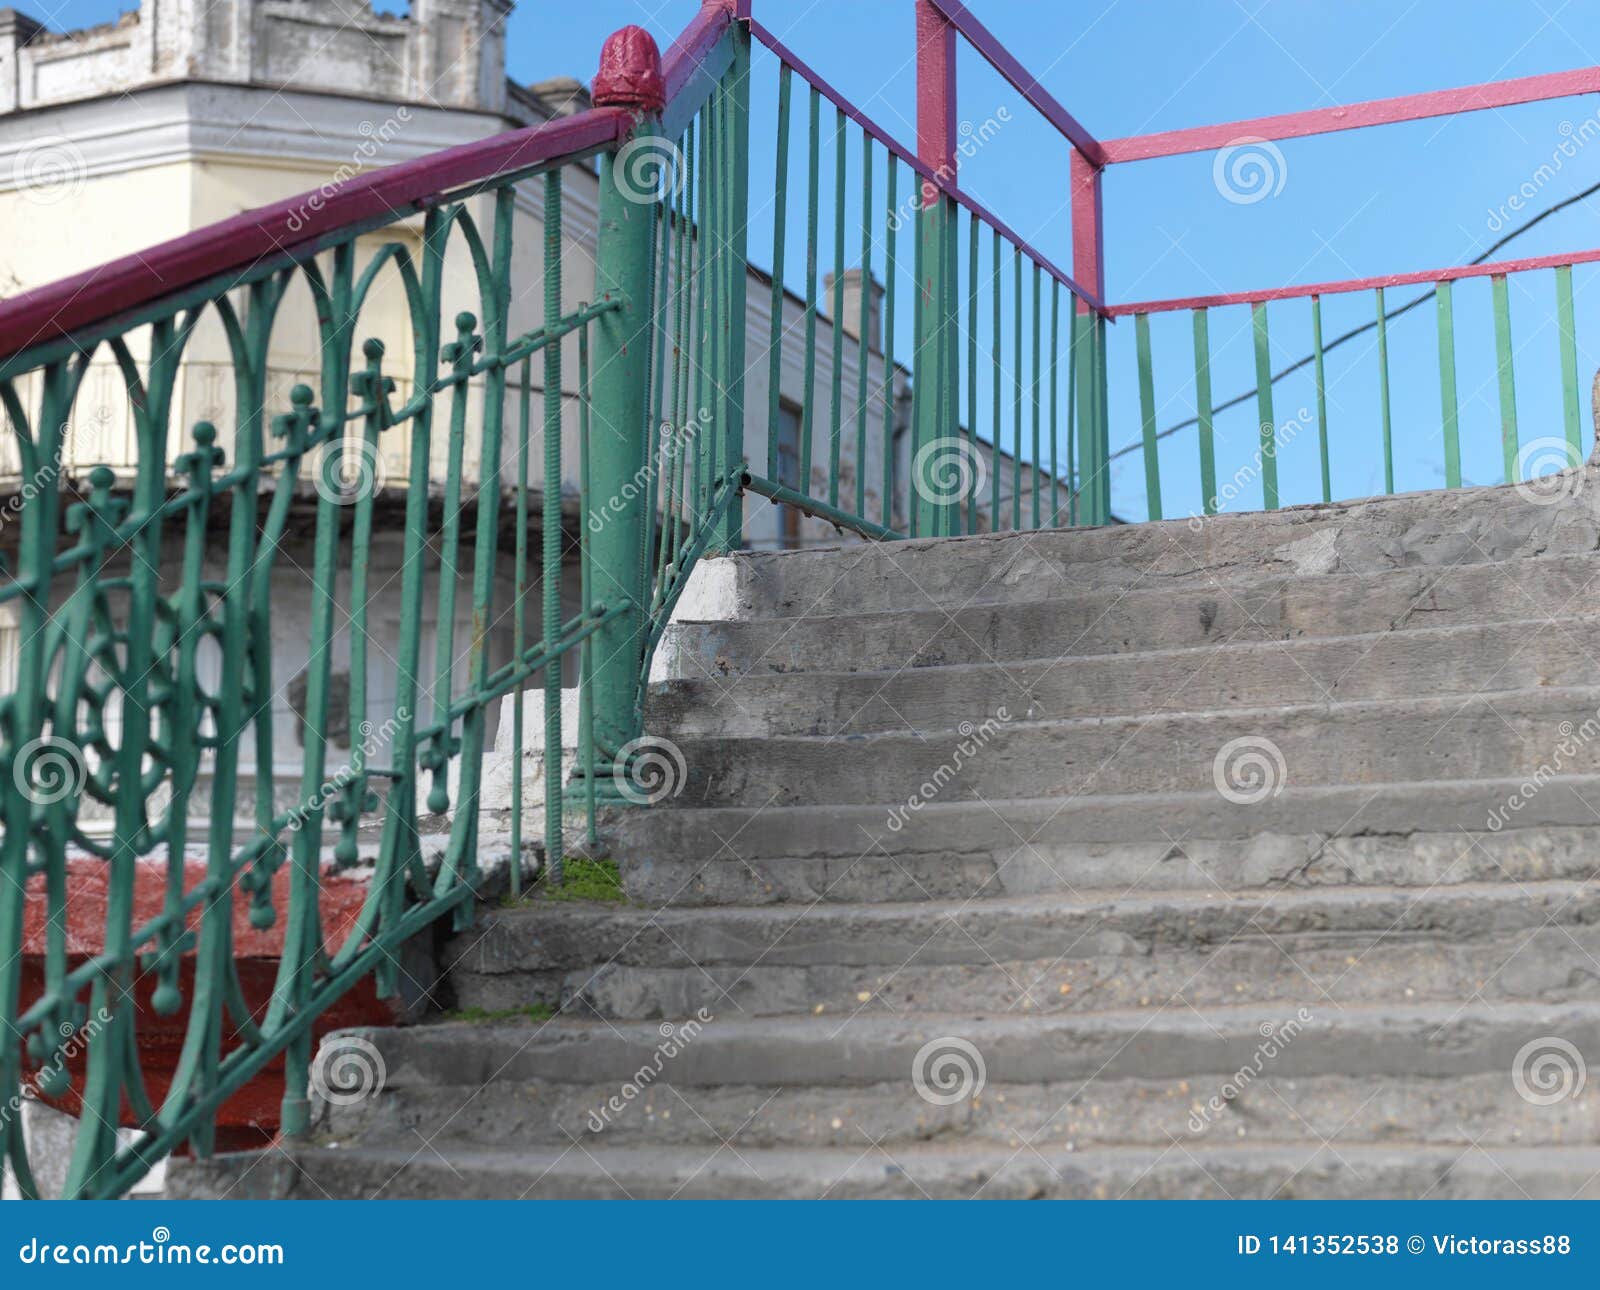 224 Painted Handrails Photos Free Royalty Free Stock Photos From Dreamstime